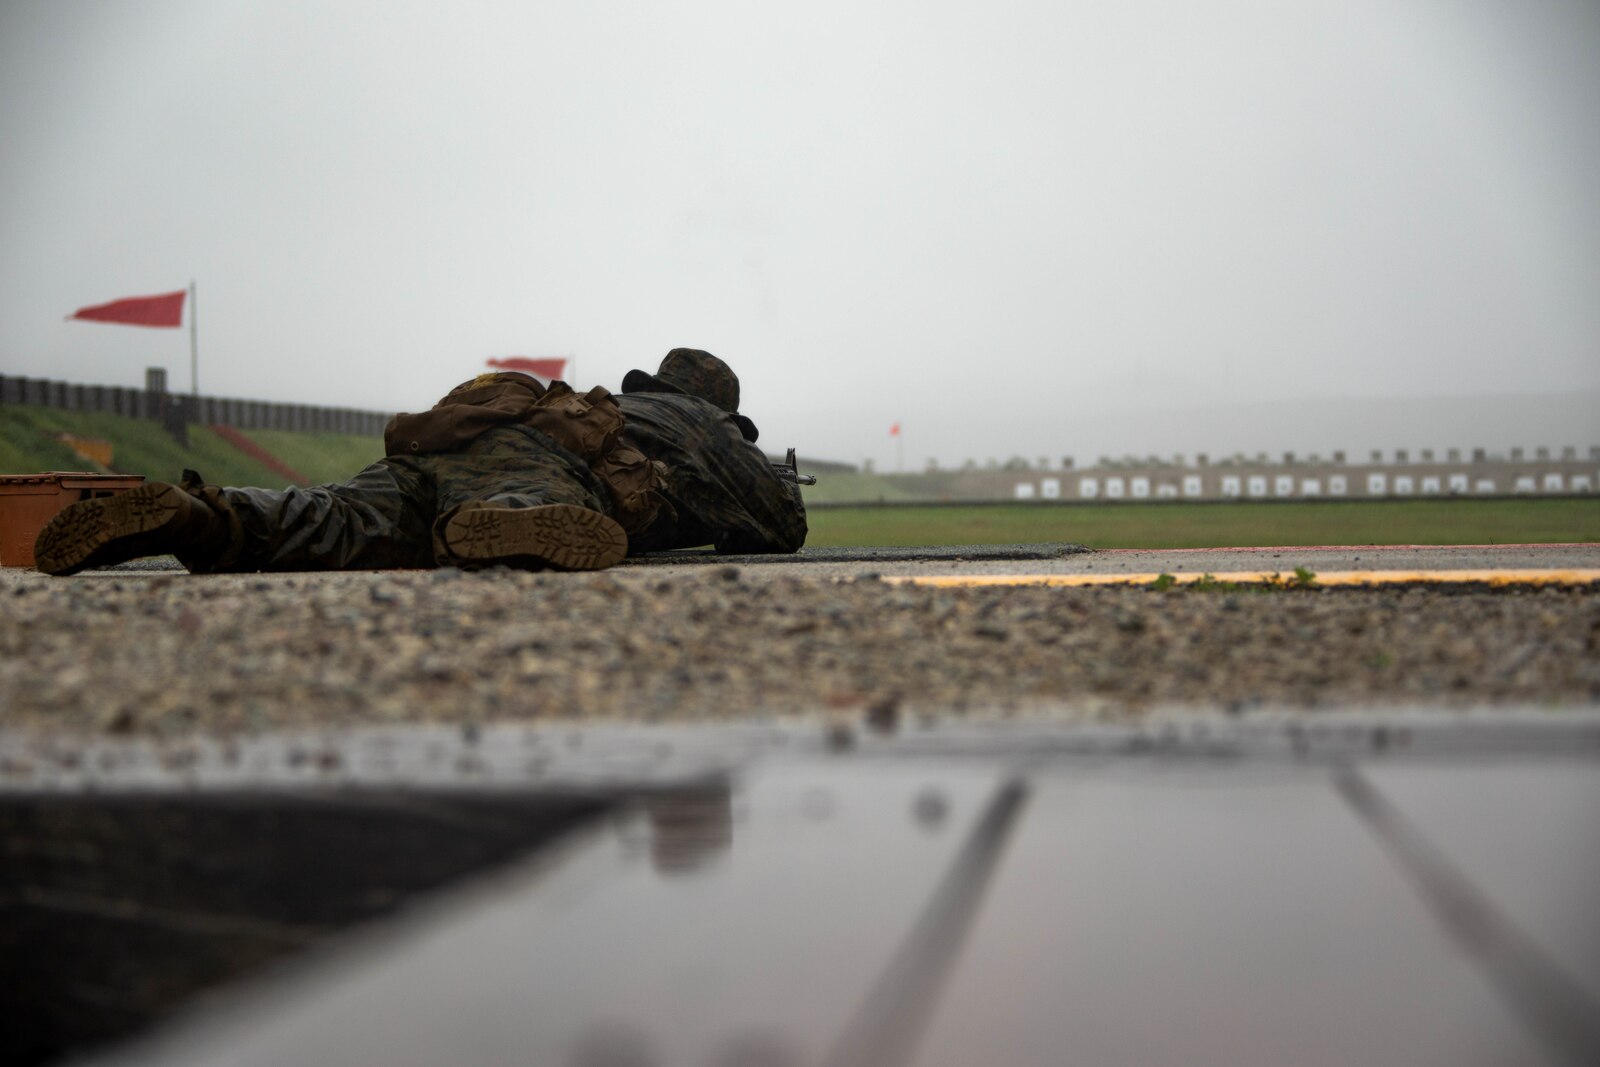 A U.S. Marine Corps recruit with Delta Company, 1st Recruit Training Battalion, aims down range during a table one course of fire at Marine Corps Base Camp Pendleton, California, Feb. 5, 2024. Table one course of fire is designed to introduce recruits to the basic fundamentals of marksmanship and rifle safety. (U.S. Marine Corps photo by Cpl. Joshua M. Dreher)